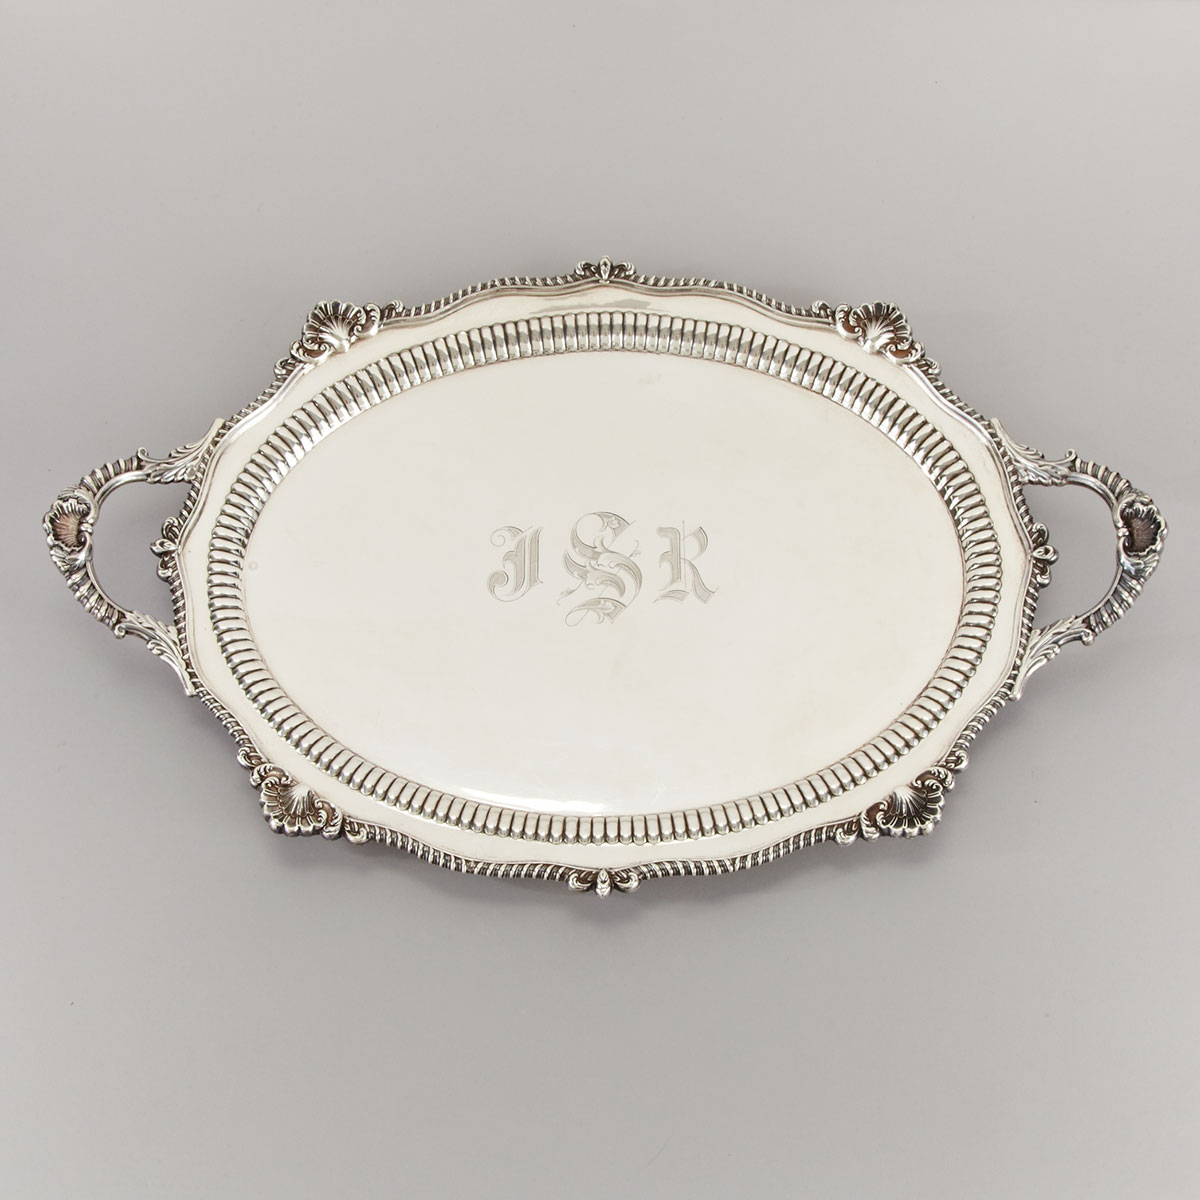 Canadian Silver Oval Serving Tray, Henry Birks & Sons, Montreal, Que., c.1949